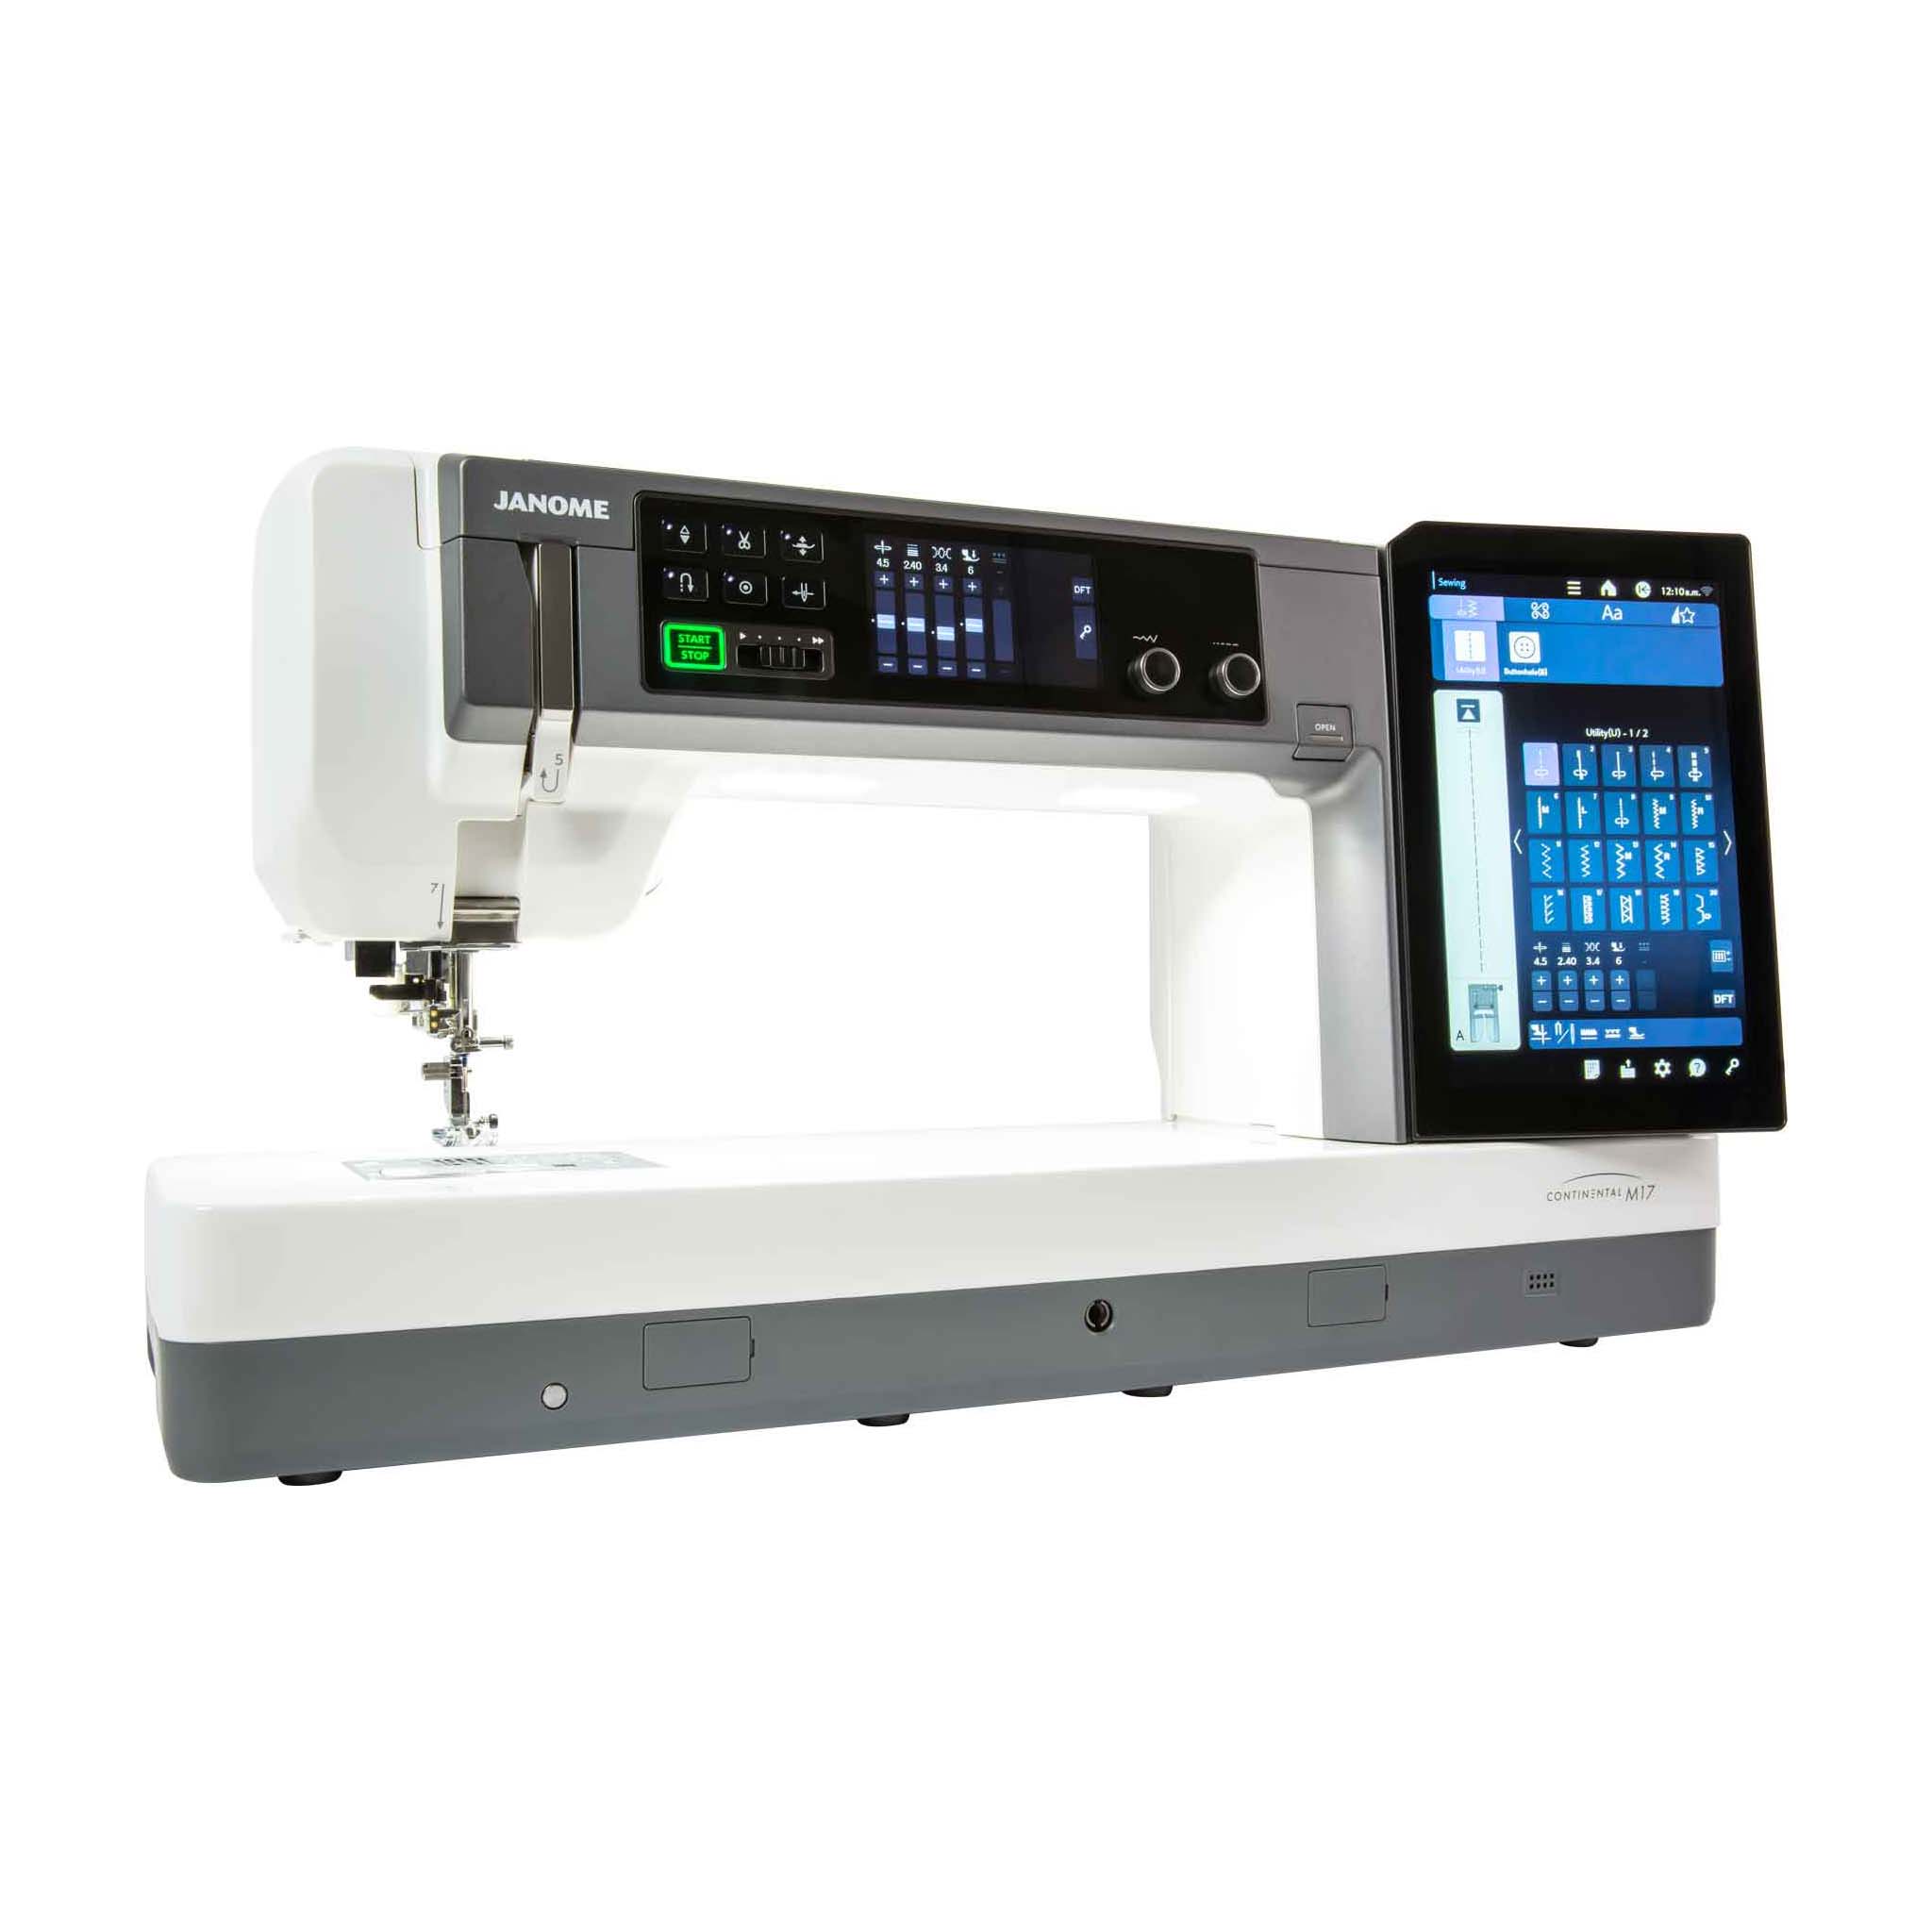 Janome Continental M17 Sewing, Quilting and Embroidery